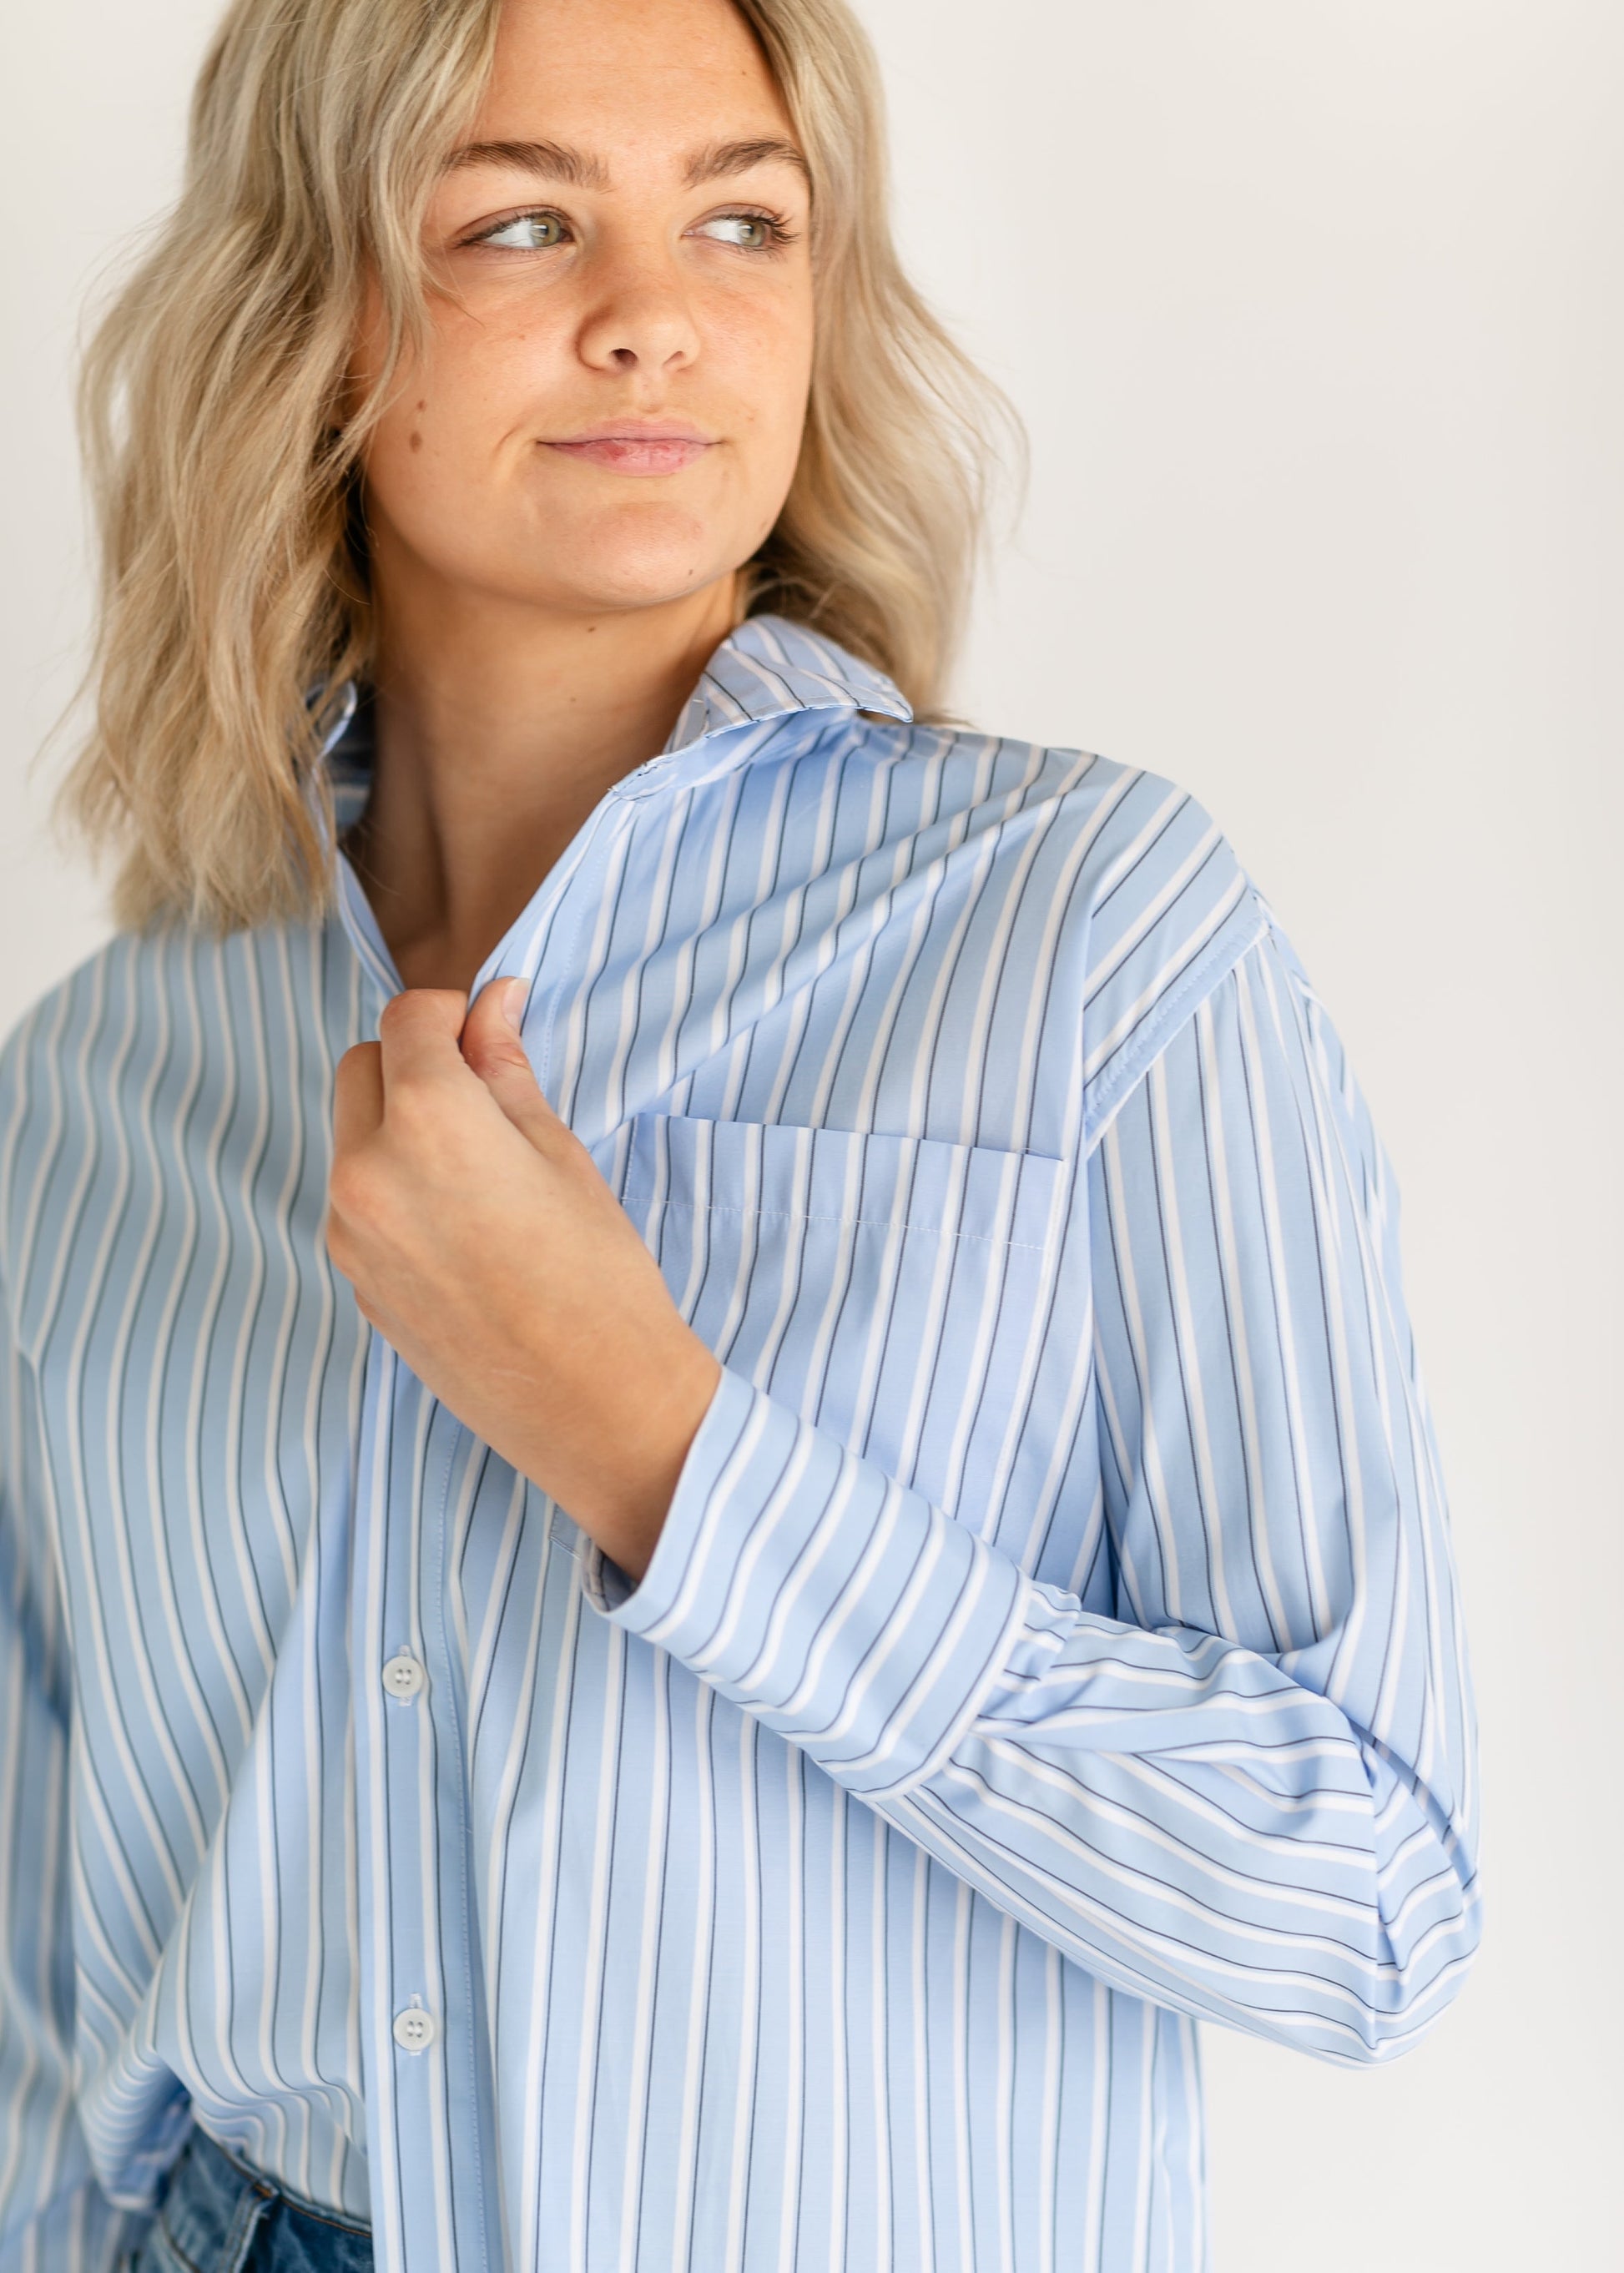 Autumn Striped Button Up Top FF Tops